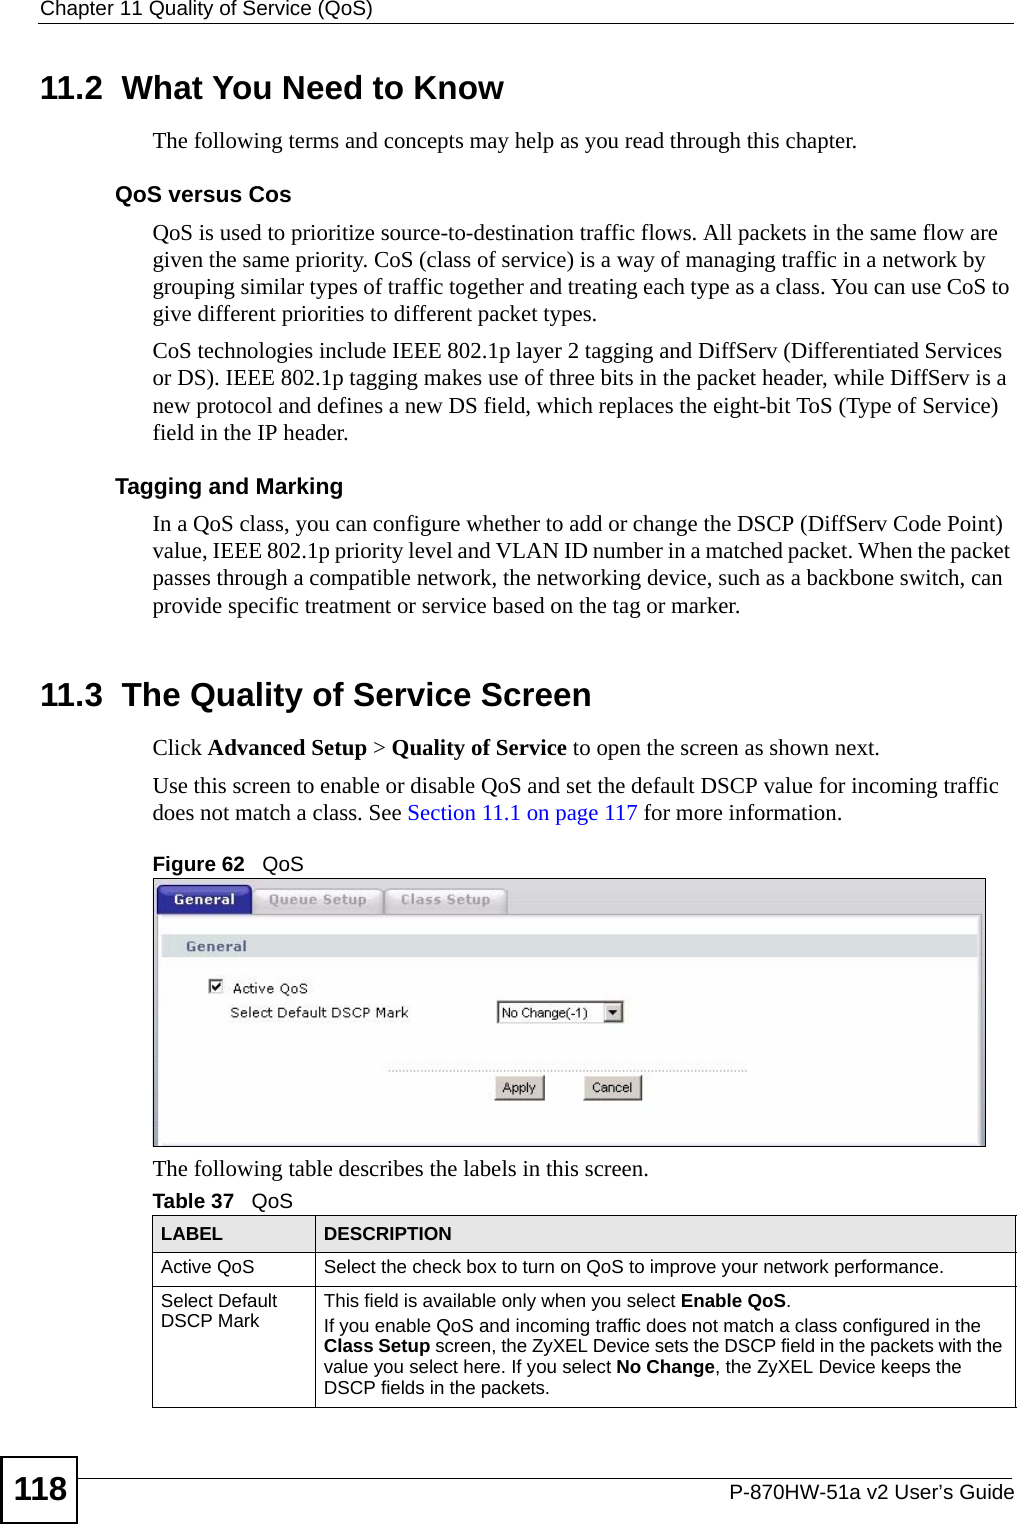 Chapter 11 Quality of Service (QoS)P-870HW-51a v2 User’s Guide11811.2  What You Need to KnowThe following terms and concepts may help as you read through this chapter.QoS versus CosQoS is used to prioritize source-to-destination traffic flows. All packets in the same flow are given the same priority. CoS (class of service) is a way of managing traffic in a network by grouping similar types of traffic together and treating each type as a class. You can use CoS to give different priorities to different packet types. CoS technologies include IEEE 802.1p layer 2 tagging and DiffServ (Differentiated Services or DS). IEEE 802.1p tagging makes use of three bits in the packet header, while DiffServ is a new protocol and defines a new DS field, which replaces the eight-bit ToS (Type of Service) field in the IP header. Tagging and MarkingIn a QoS class, you can configure whether to add or change the DSCP (DiffServ Code Point) value, IEEE 802.1p priority level and VLAN ID number in a matched packet. When the packet passes through a compatible network, the networking device, such as a backbone switch, can provide specific treatment or service based on the tag or marker.11.3  The Quality of Service Screen Click Advanced Setup &gt; Quality of Service to open the screen as shown next. Use this screen to enable or disable QoS and set the default DSCP value for incoming traffic does not match a class. See Section 11.1 on page 117 for more information.Figure 62   QoS The following table describes the labels in this screen. Table 37   QoSLABEL DESCRIPTIONActive QoS Select the check box to turn on QoS to improve your network performance. Select Default DSCP Mark  This field is available only when you select Enable QoS.If you enable QoS and incoming traffic does not match a class configured in the Class Setup screen, the ZyXEL Device sets the DSCP field in the packets with the value you select here. If you select No Change, the ZyXEL Device keeps the DSCP fields in the packets.